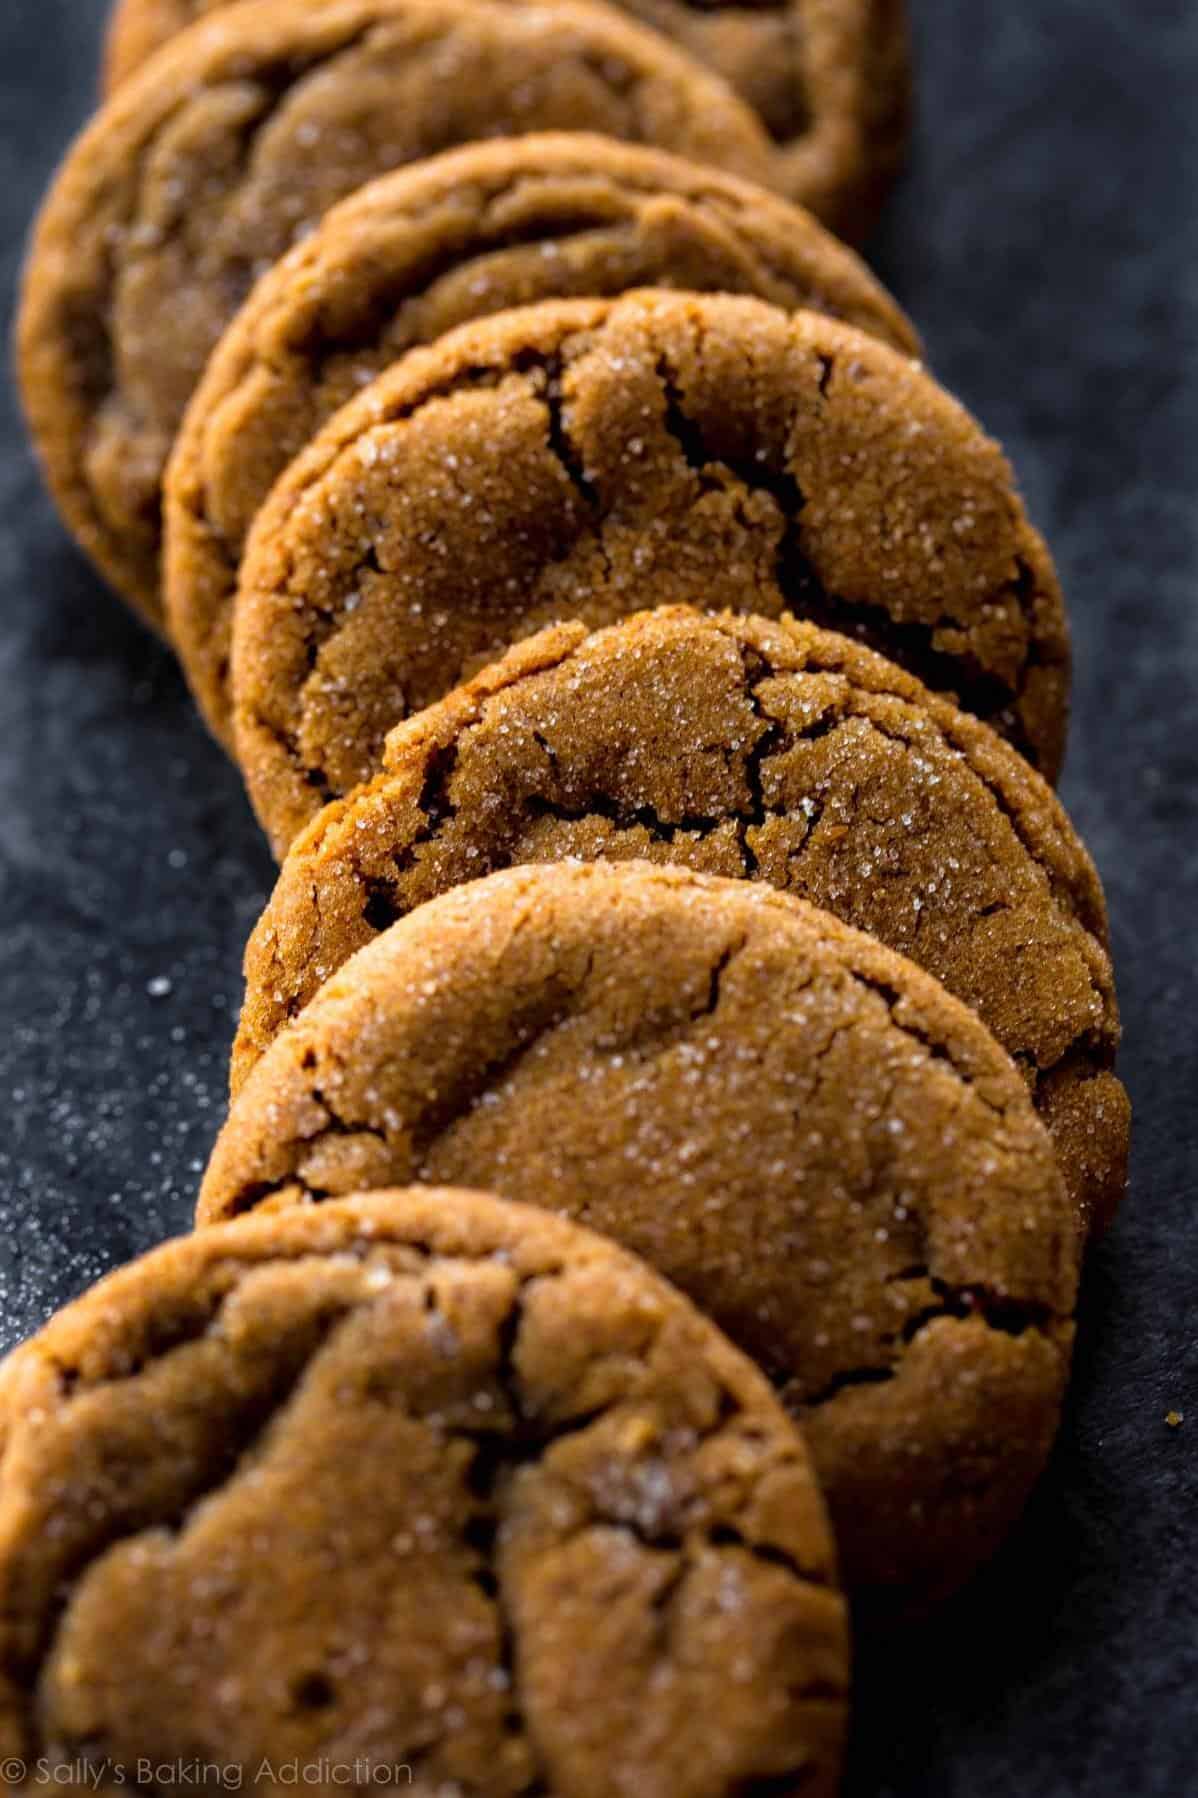  Get ready to sink your teeth into these warm and chewy molasses cookies!